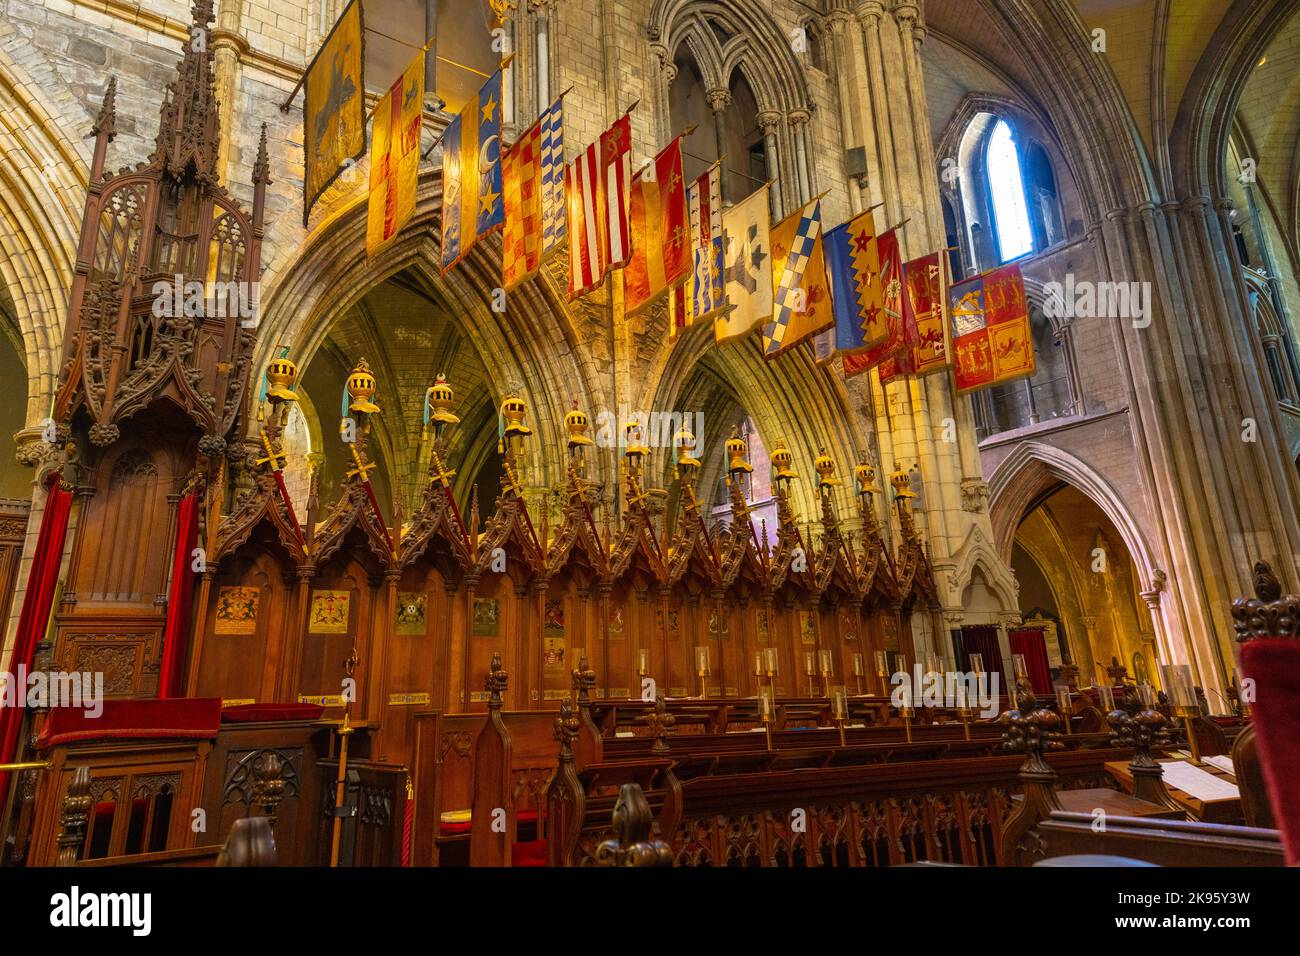 Ireland Dublin St Patrick's Cathedral Church of Ireland was Catholic founded 1191 Gothic choir stalls Knights of St Patrick heraldic banners flags Stock Photo